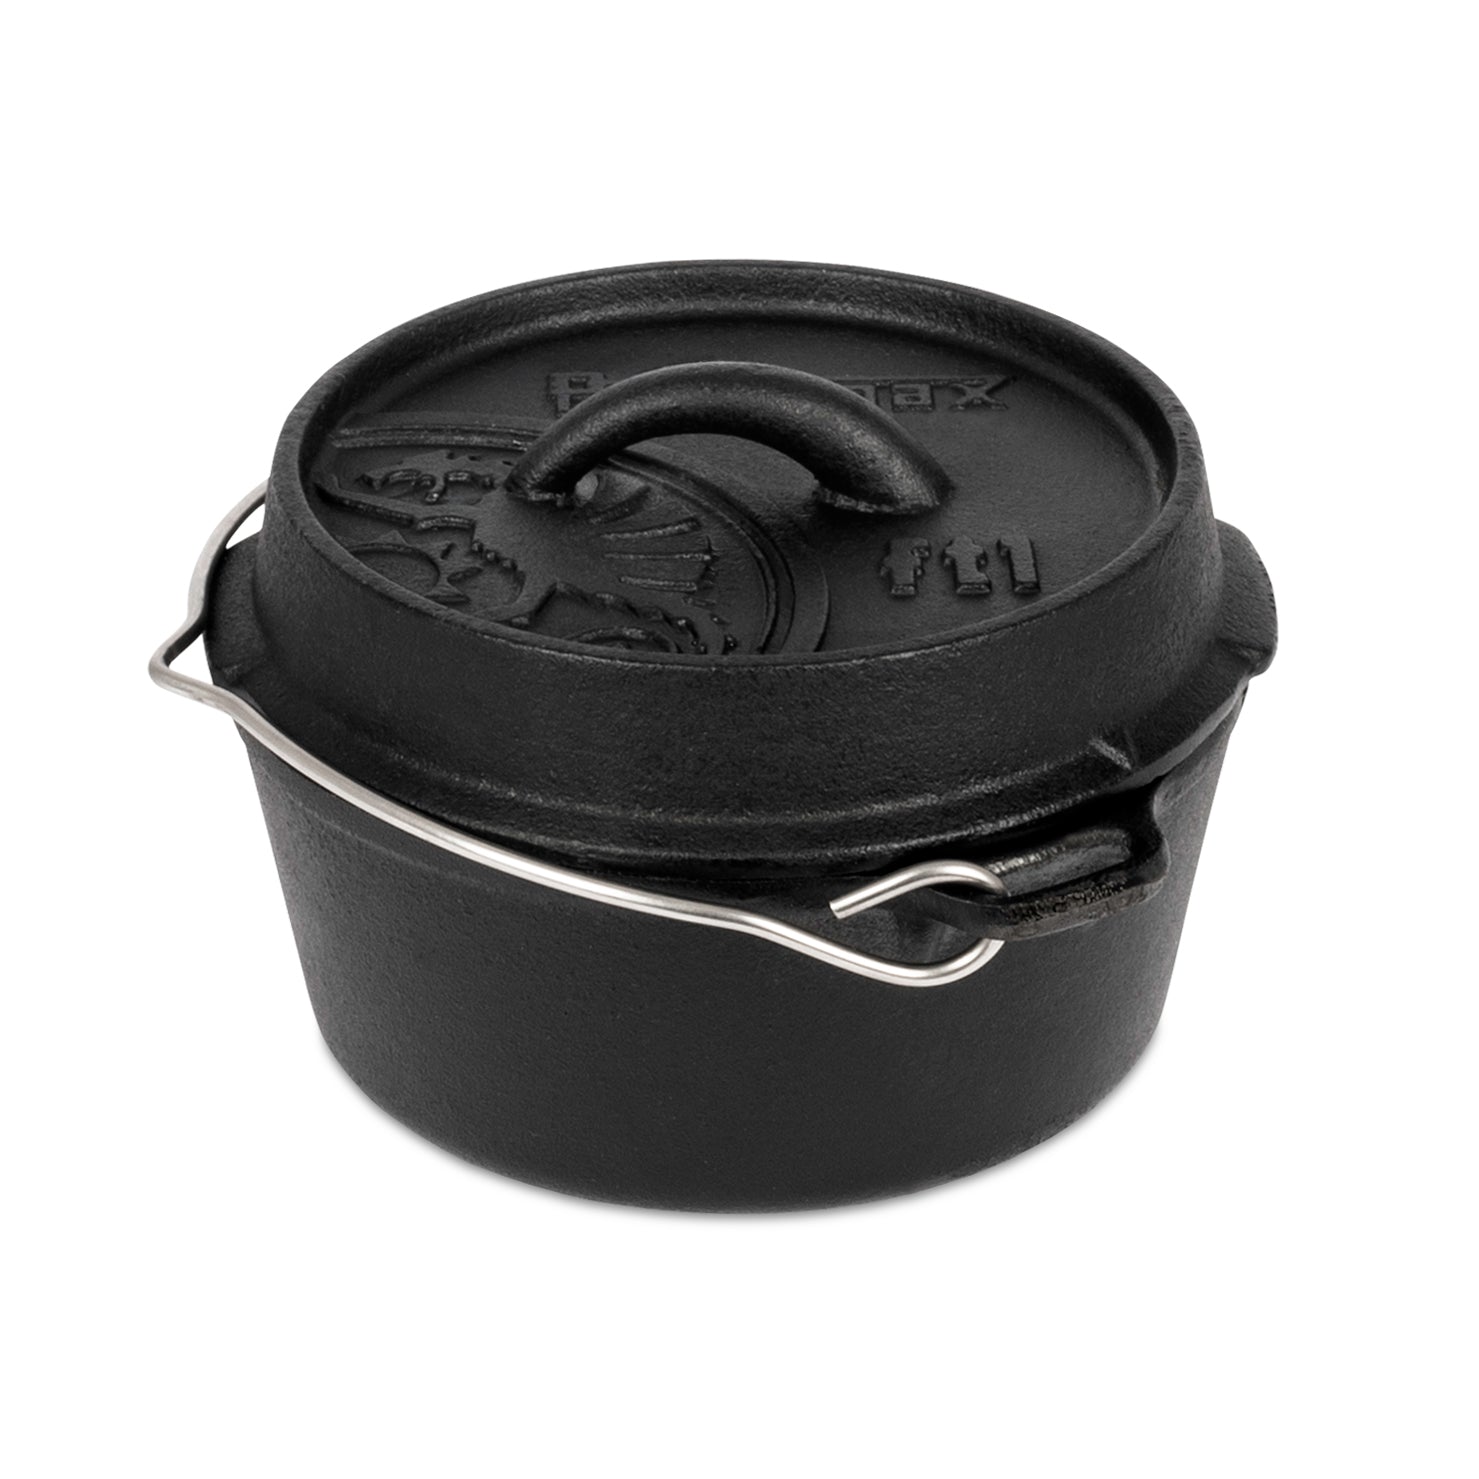 Cast Iron Dutch Oven ft1 Camp Cooking Pot with a Flat Bottom Surface - Petromax - ft1-t